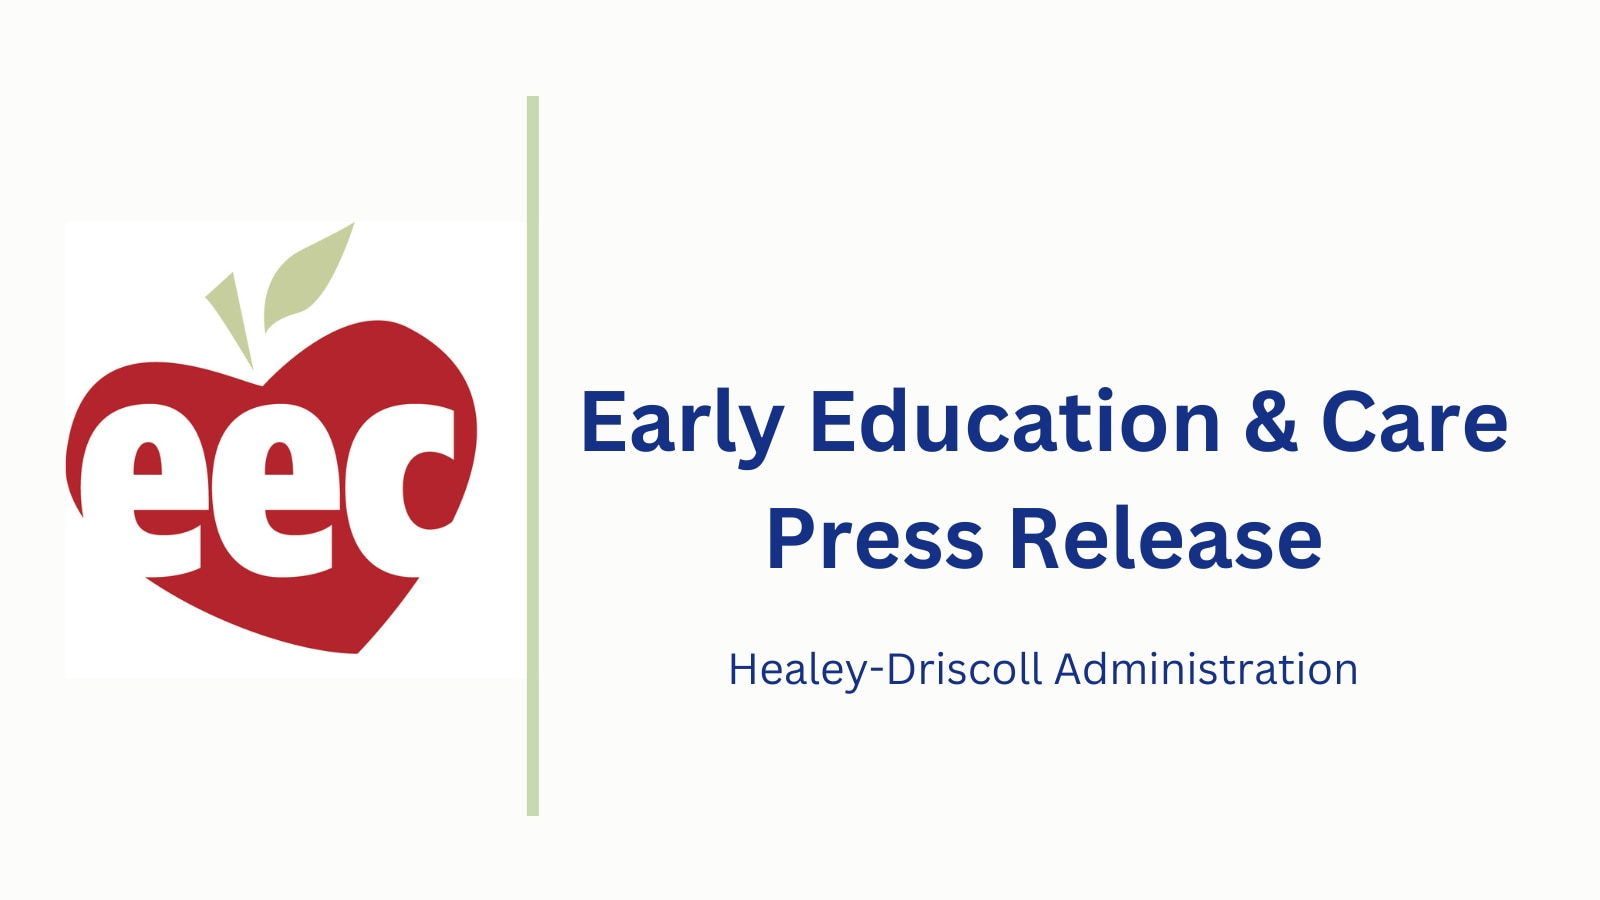 Early Education & Care Press Release. Healey-Driscoll Administration.